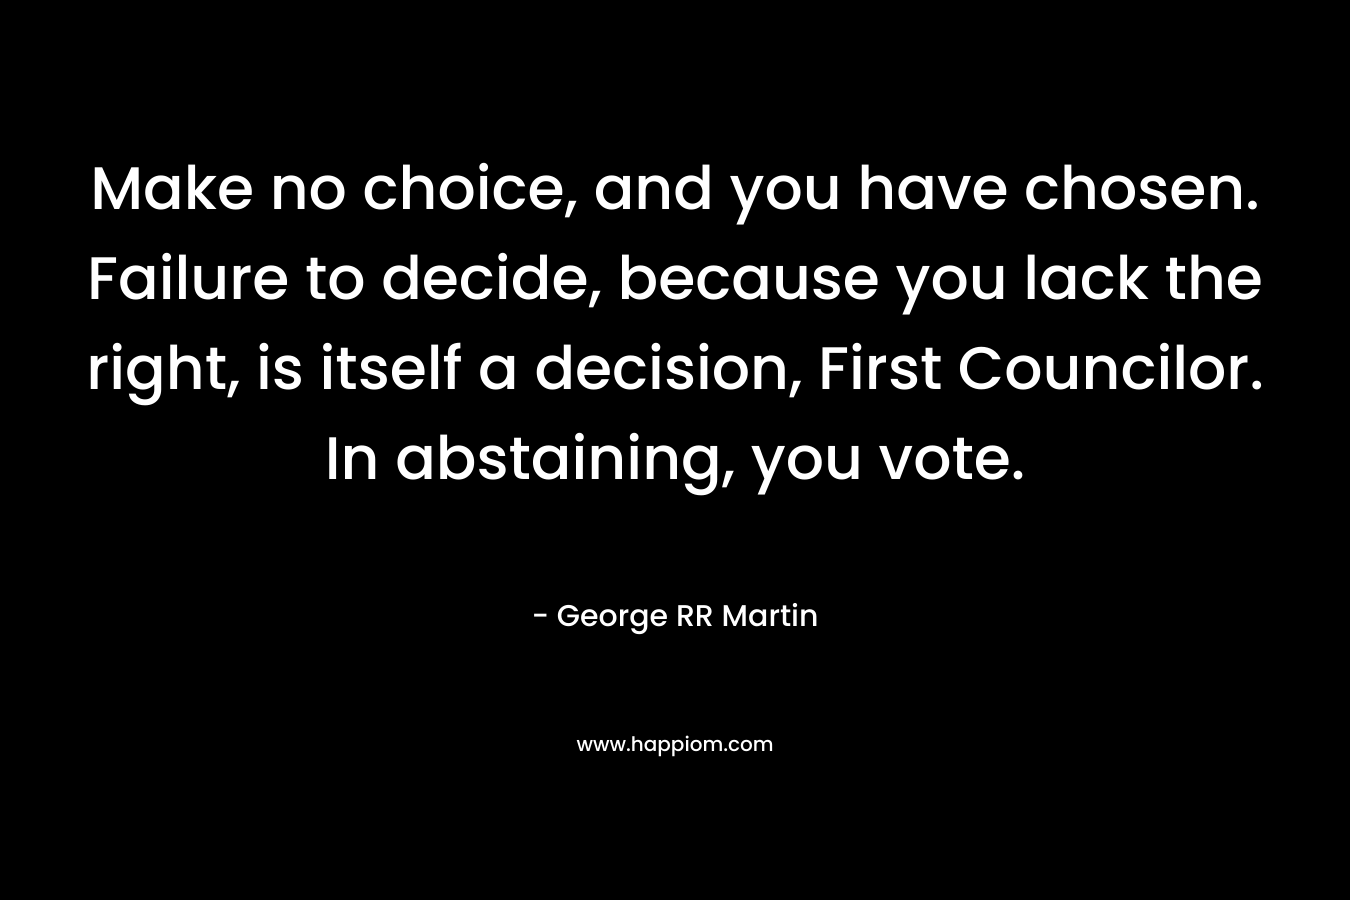 Make no choice, and you have chosen. Failure to decide, because you lack the right, is itself a decision, First Councilor. In abstaining, you vote.